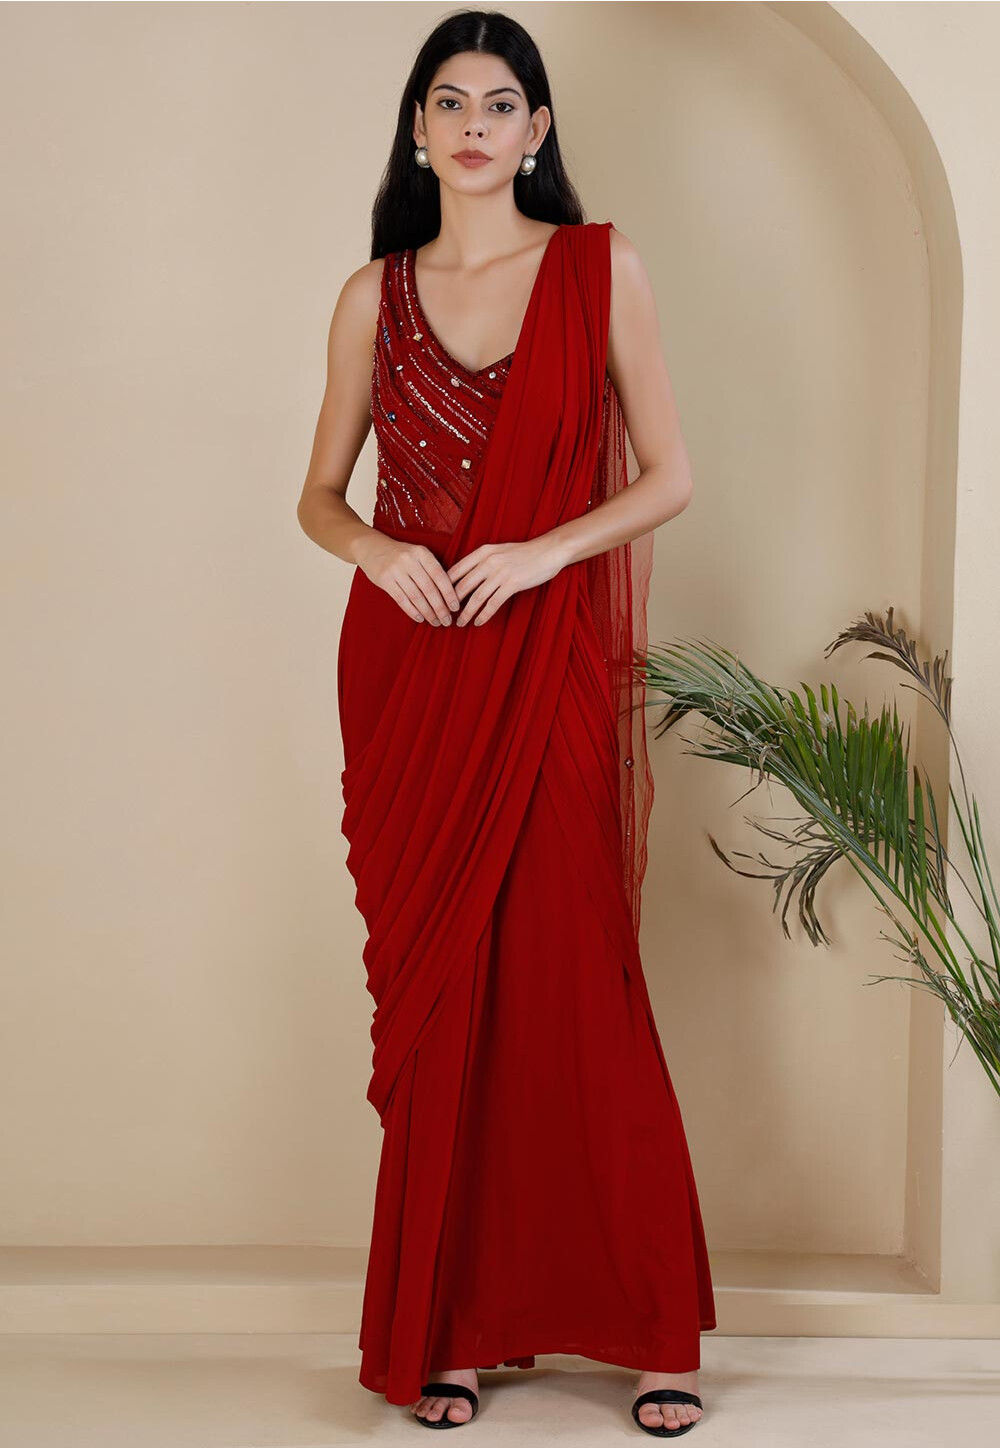 Gown Dress Sarees - Buy Gown Dress Sarees online in India